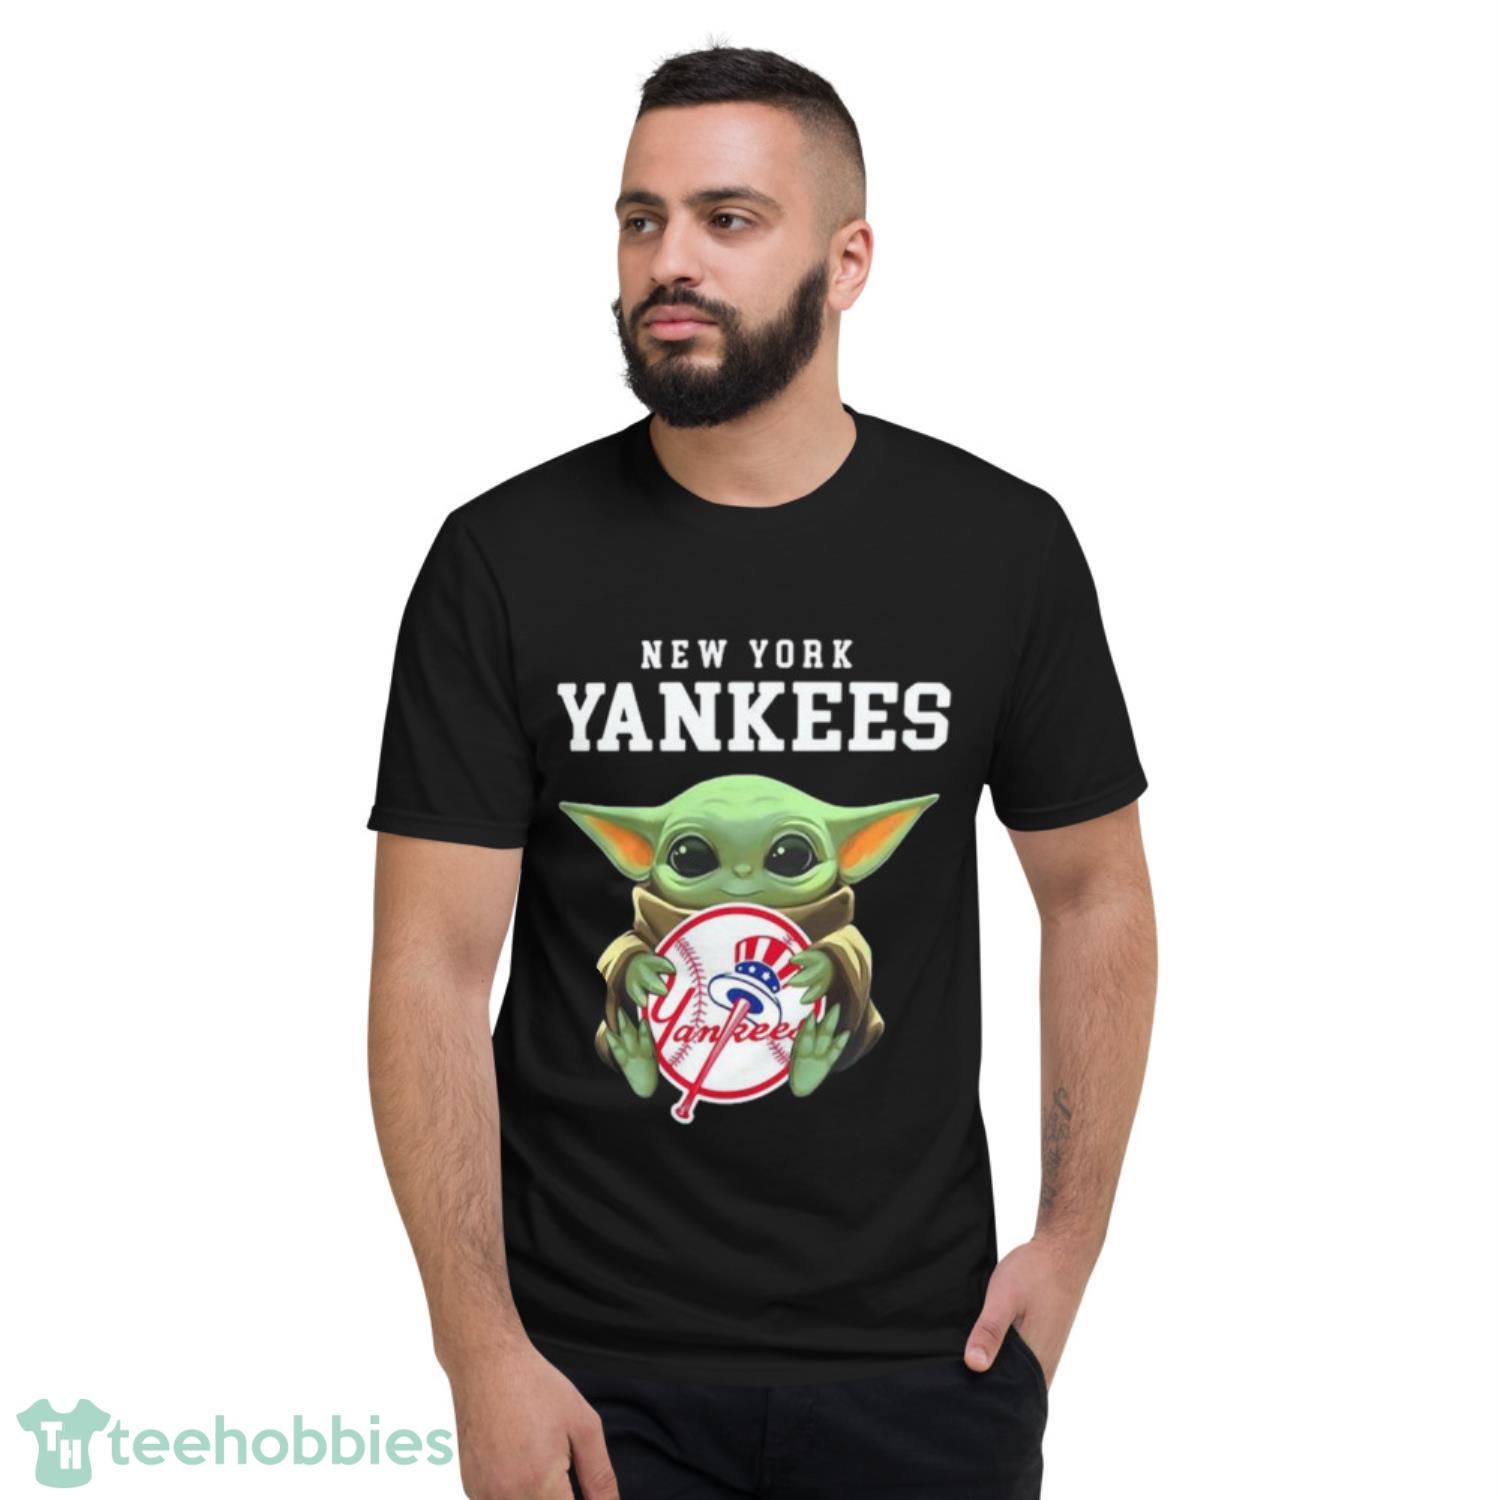 MLB New York Yankees Toddler Boys' Pullover Jersey - 3T